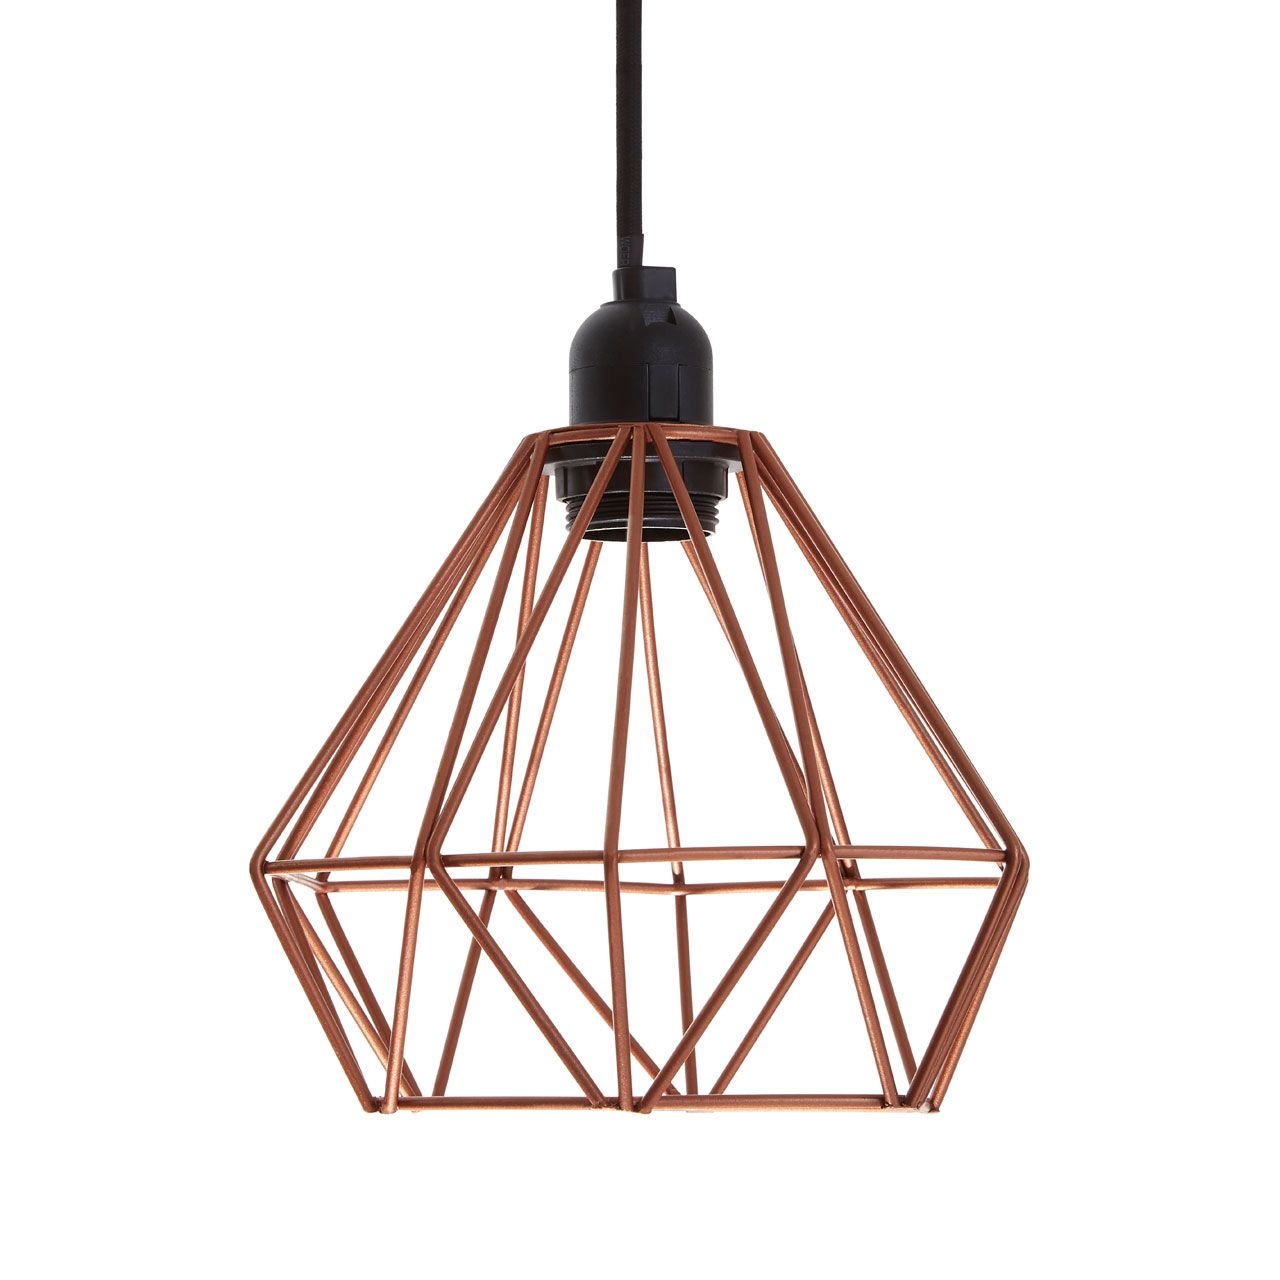 Bartol Ceiling Pendant Light In Copper With Metal Wire Frame